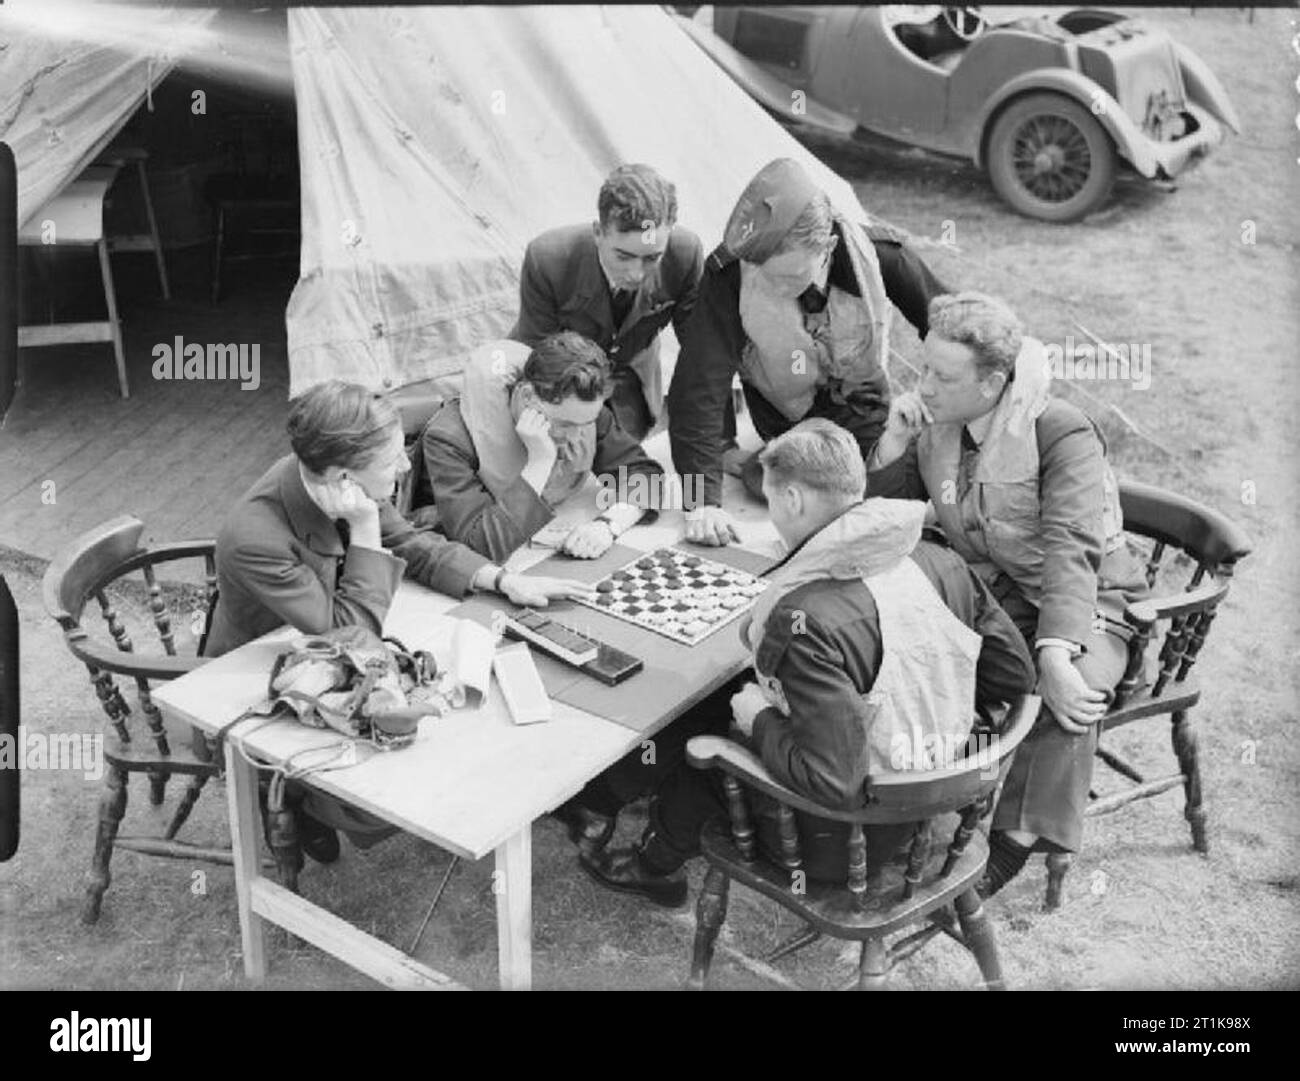 Royal Air Force Fighter Command, 1939-1945. Pilots and gunners of No 264 Squadron RAF, pass the time with a game of draughts while waiting at readiness outside their dispersal tent at Kirton-in-Lindsey, Lincolnshire. Stock Photo